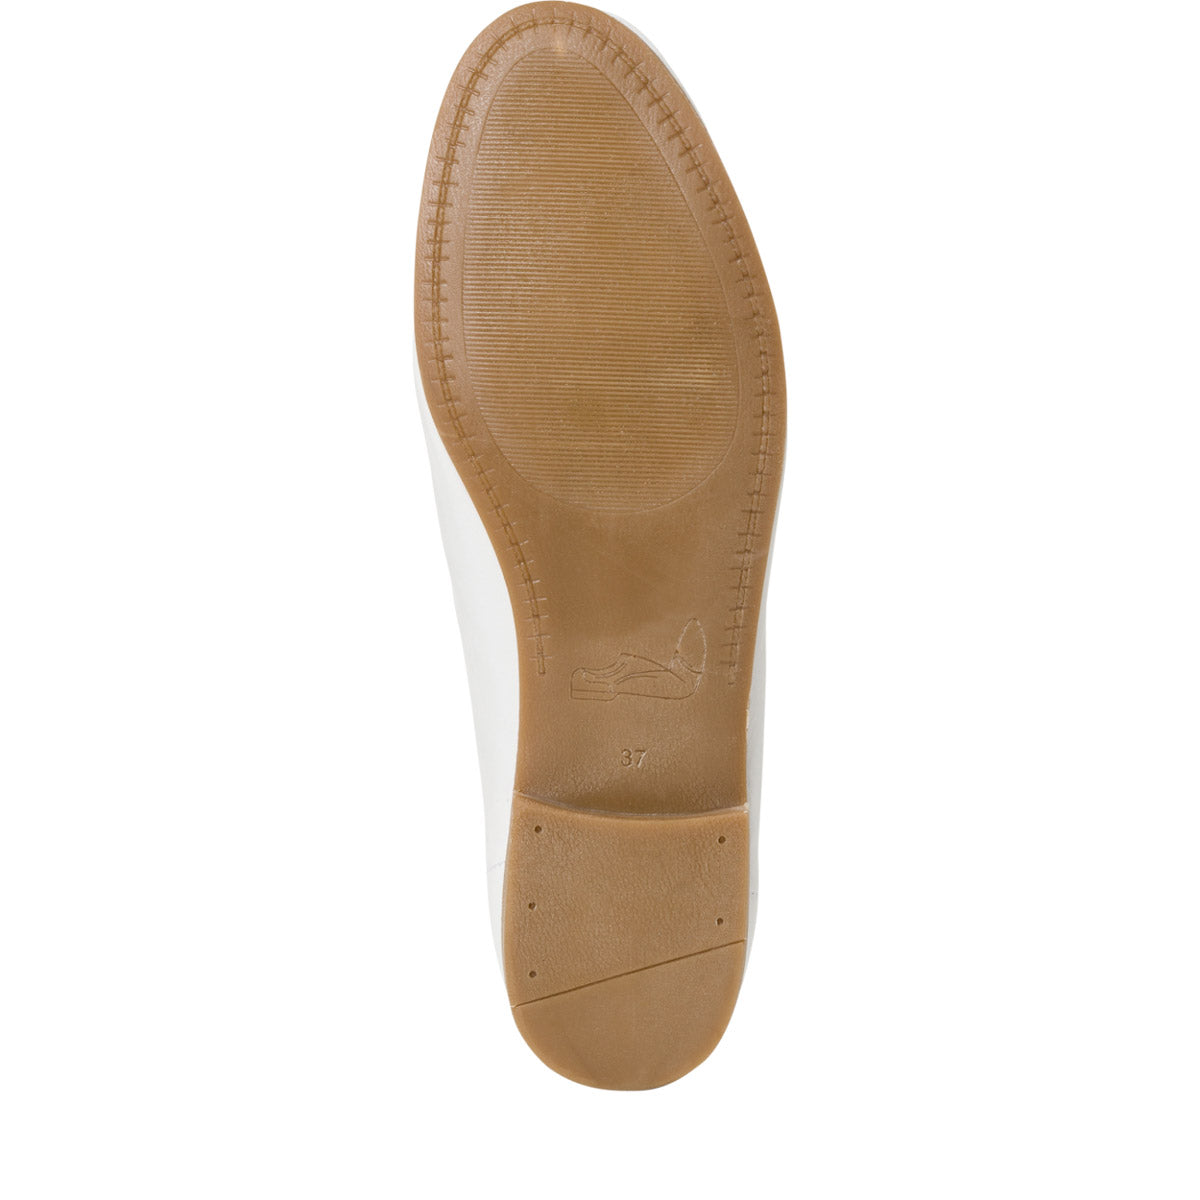 Bottom view of the loafers showing the gum-colored tan sole.